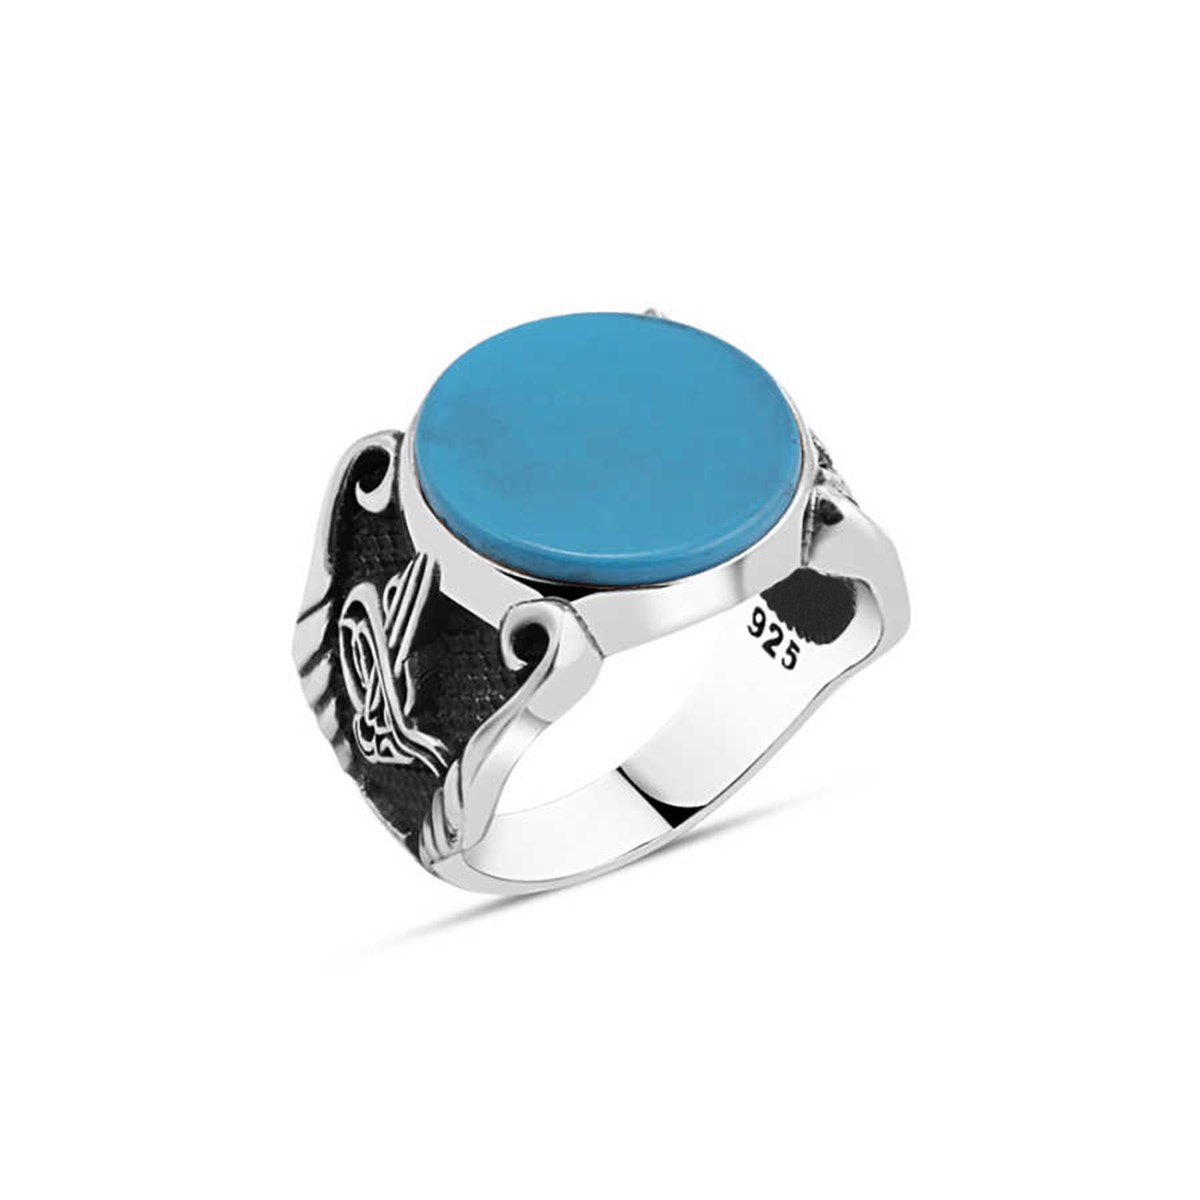 Plain Squeezed Turquoise Stone Sterling Silver Men's Ring